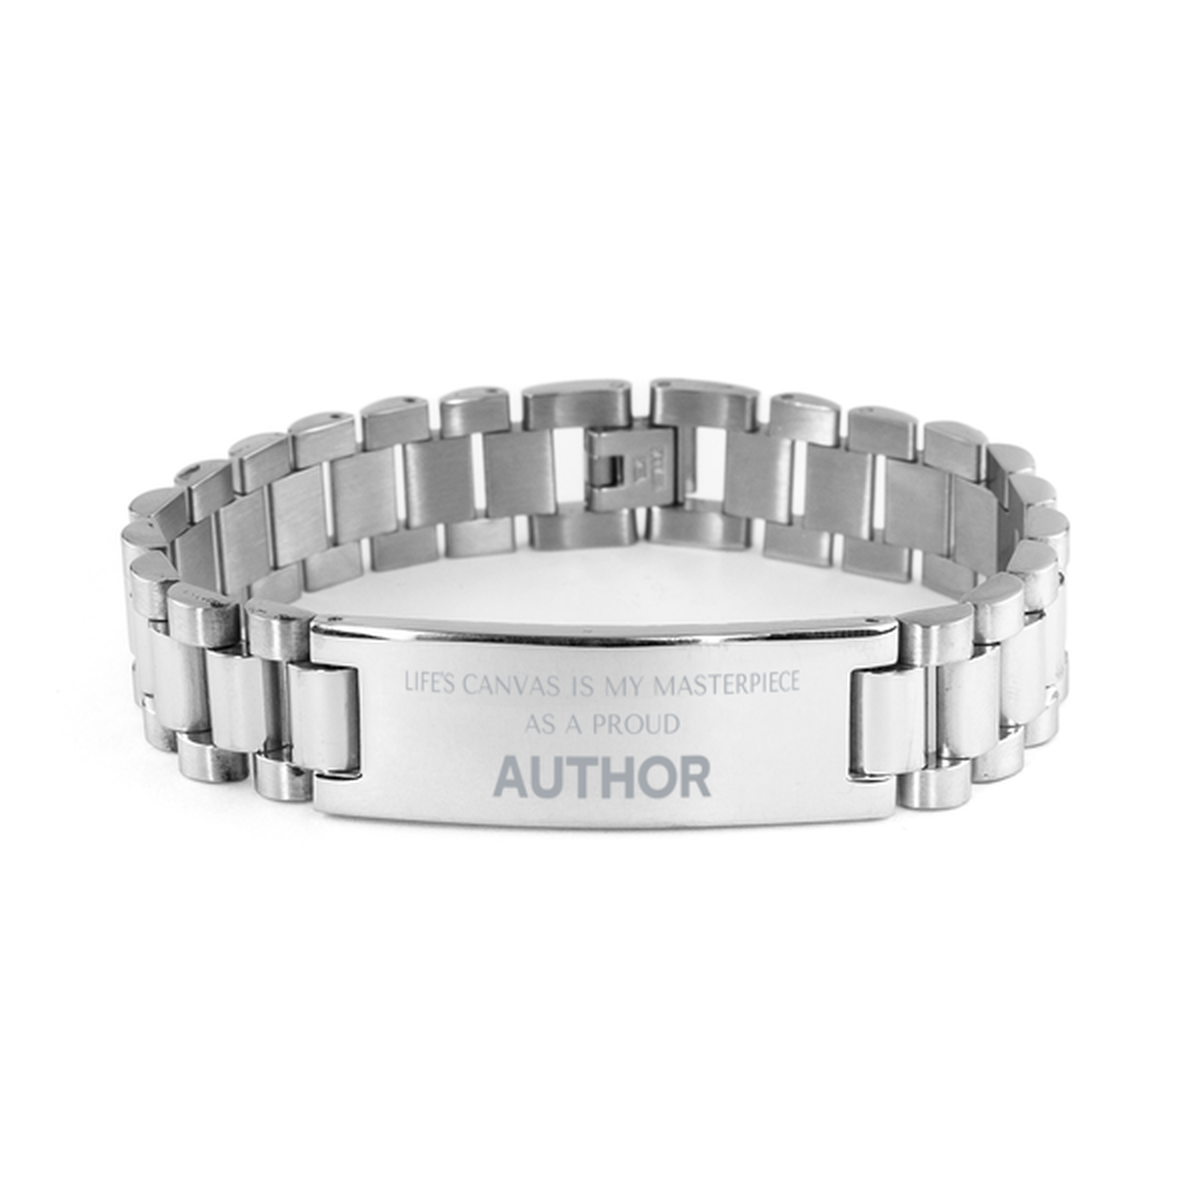 Proud Author Gifts, Life's canvas is my masterpiece, Epic Birthday Christmas Unique Ladder Stainless Steel Bracelet For Author, Coworkers, Men, Women, Friends